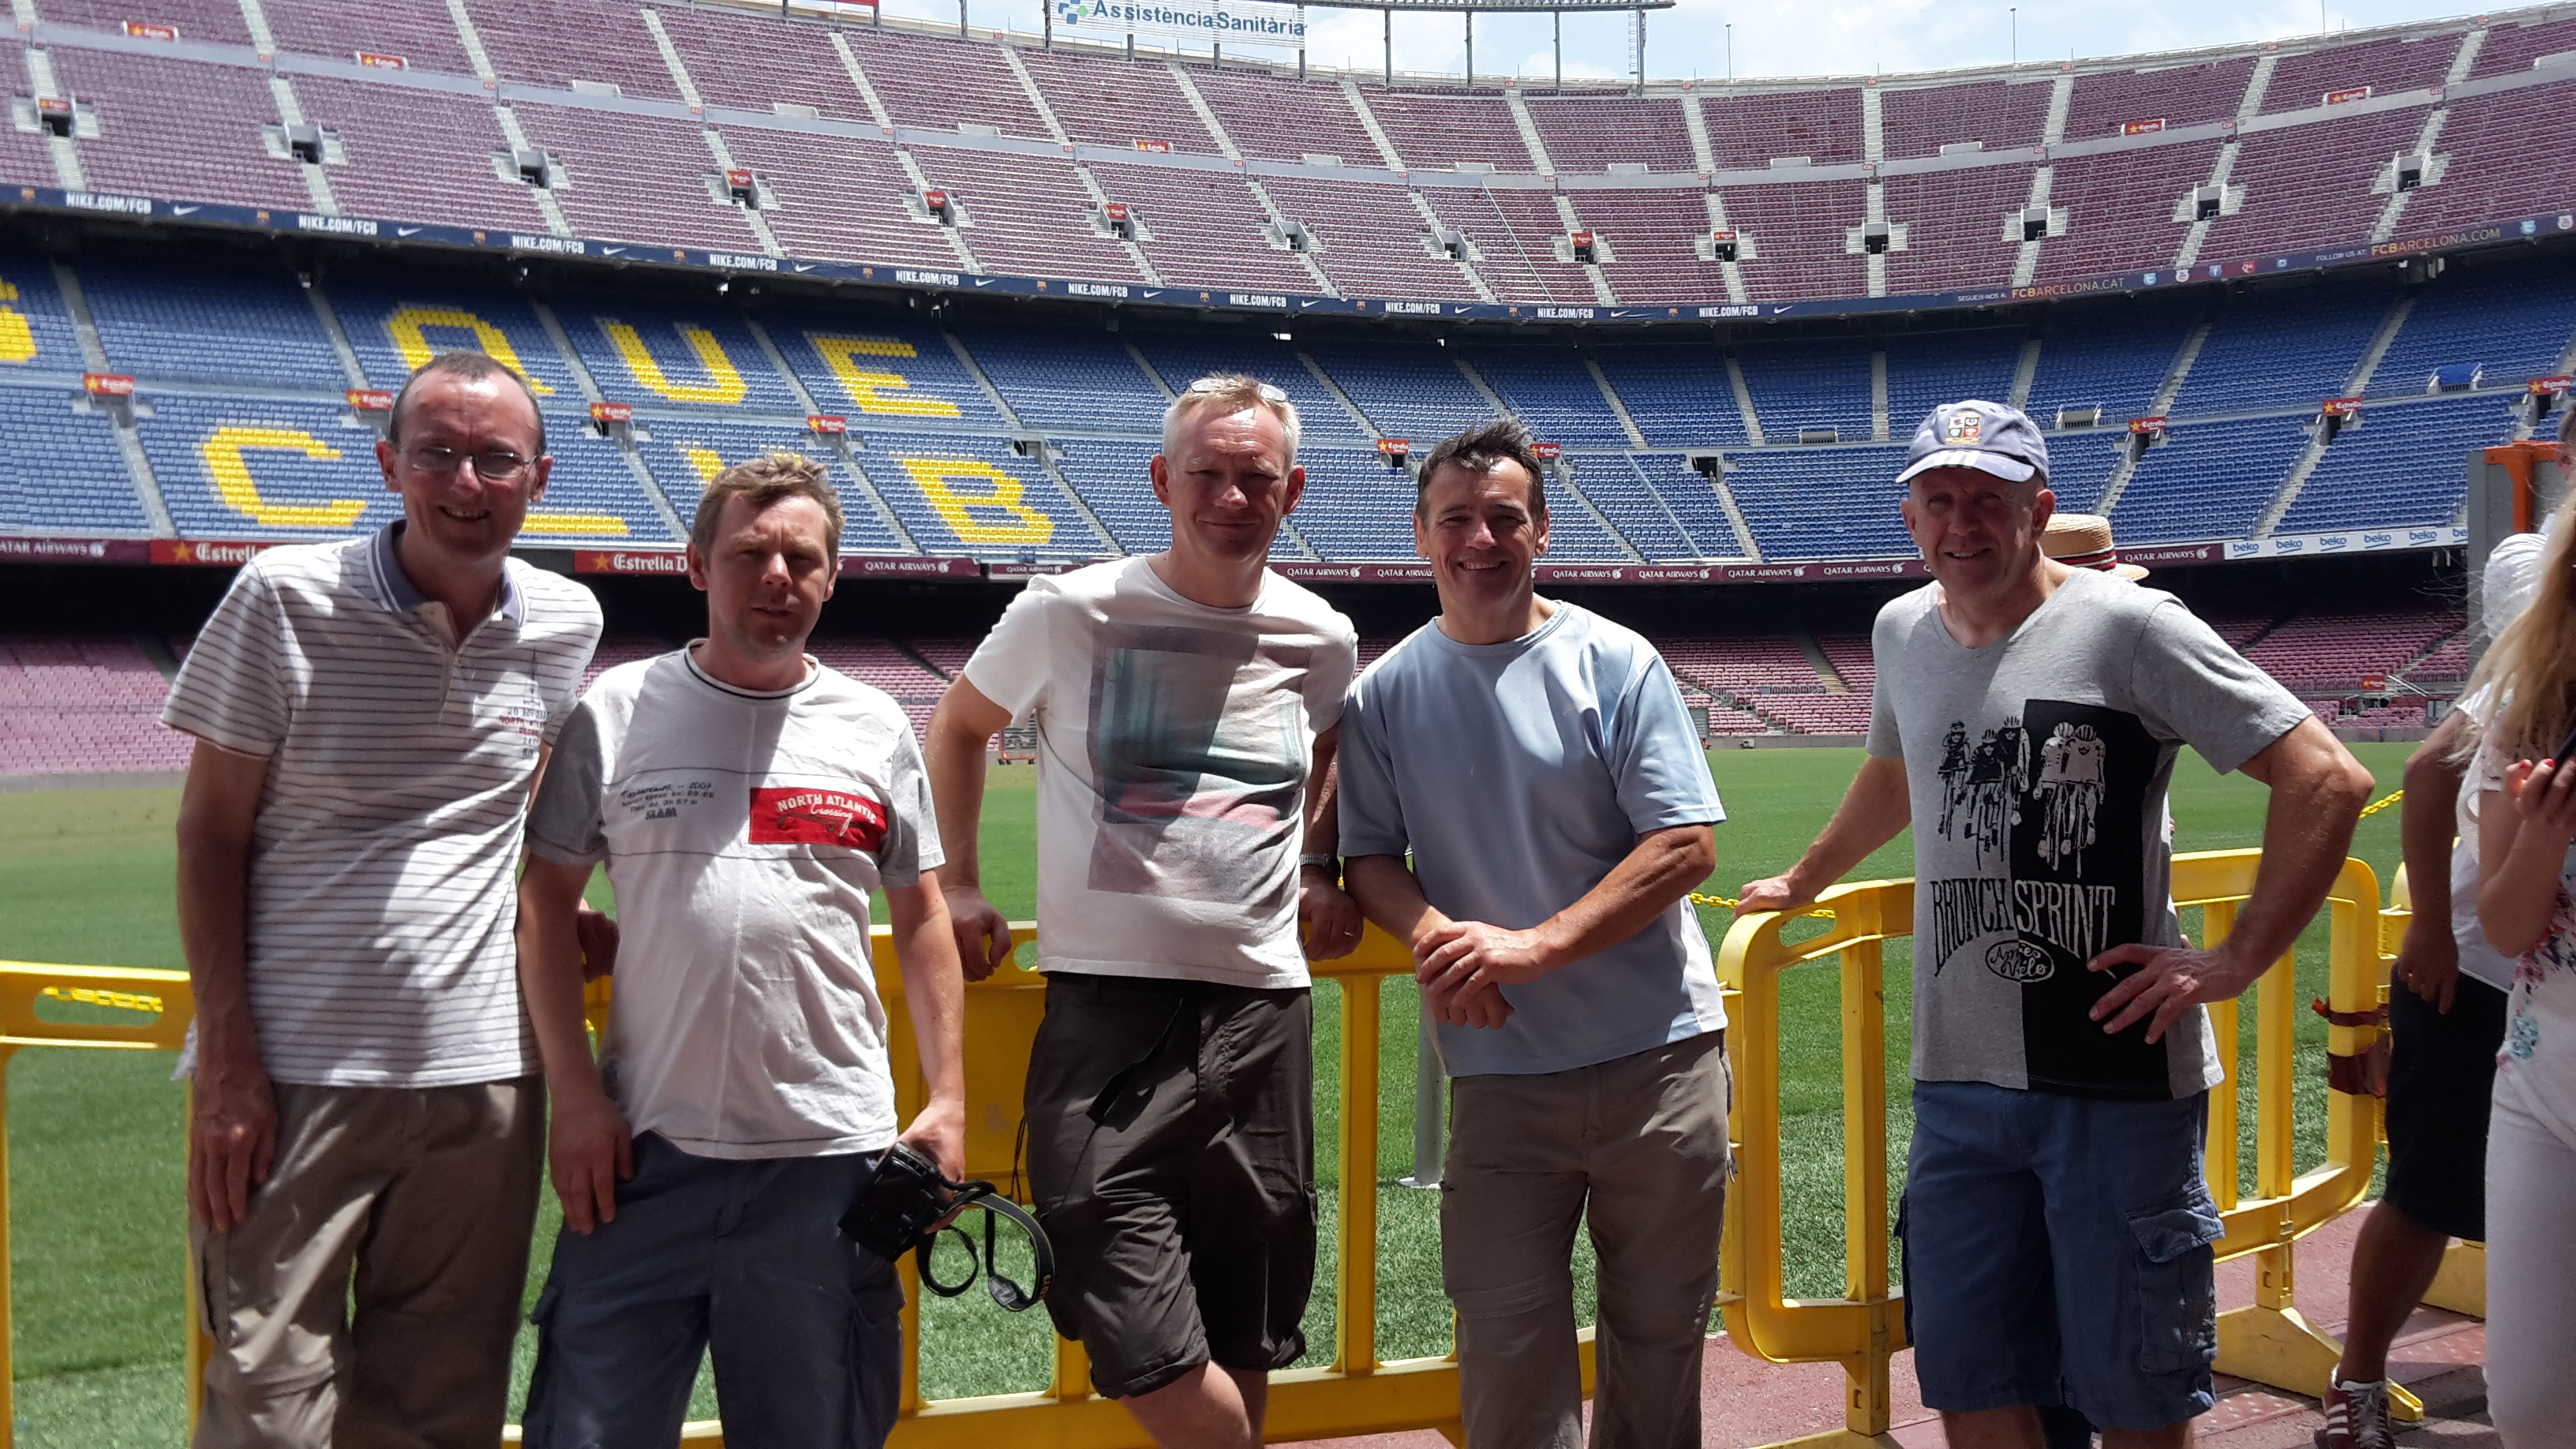 Greetings from the Nou Camp